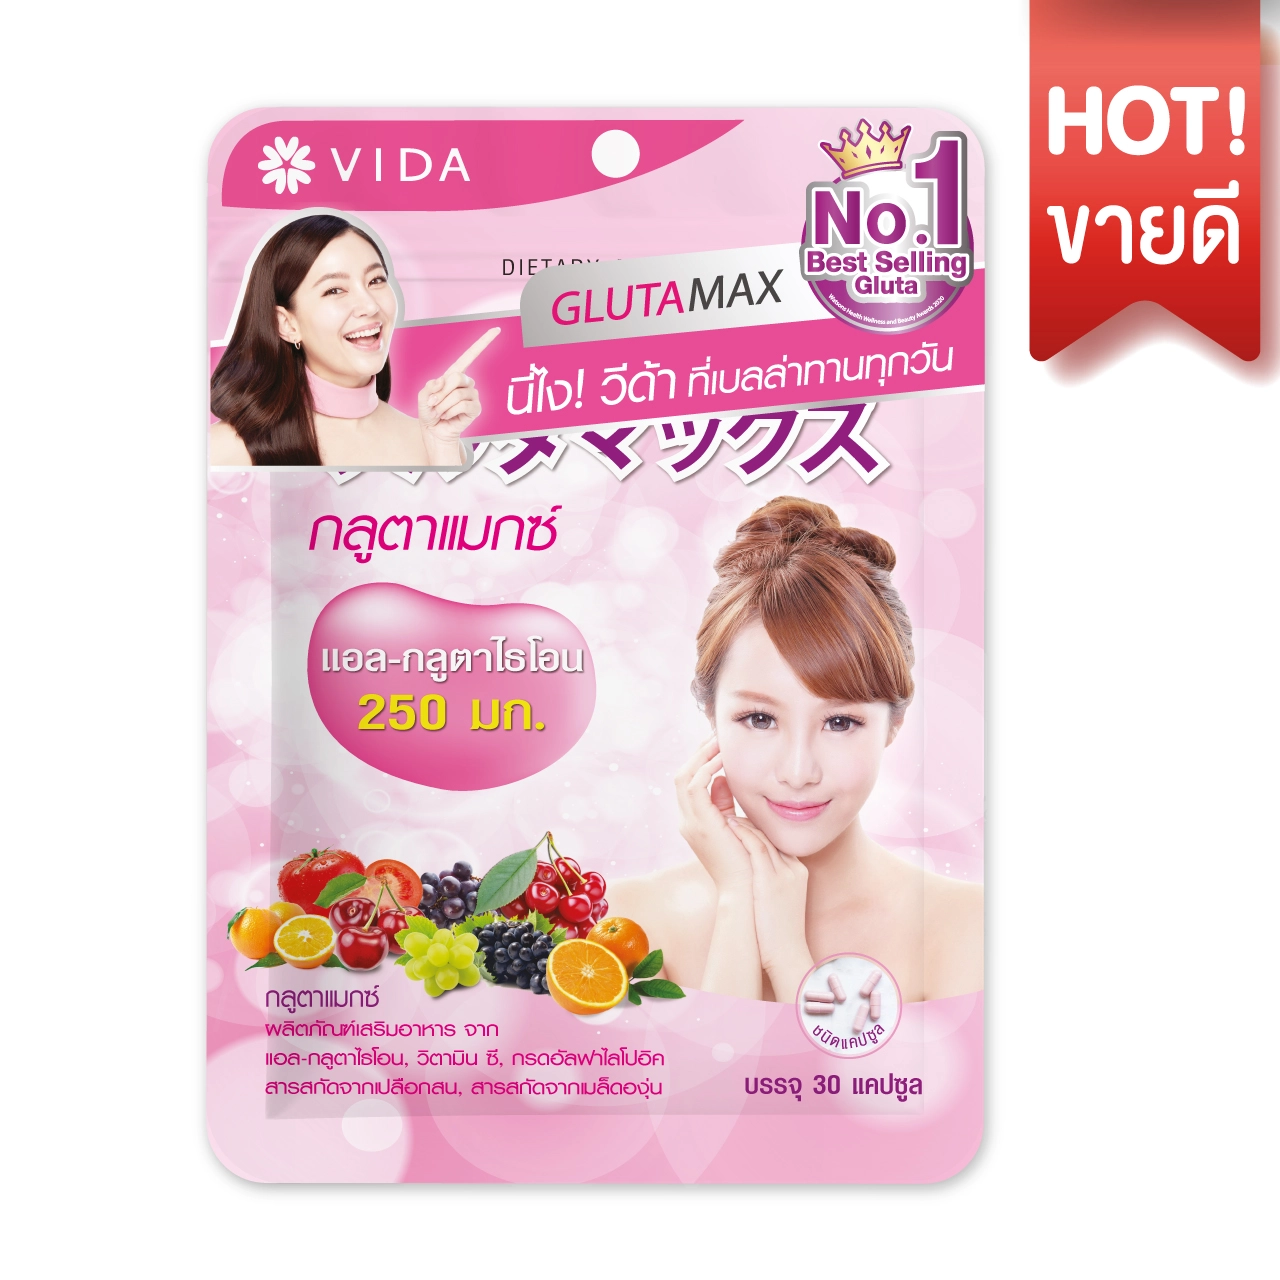 Vida Gluta Berry+ 250mg capsules for radiant and glowing skin